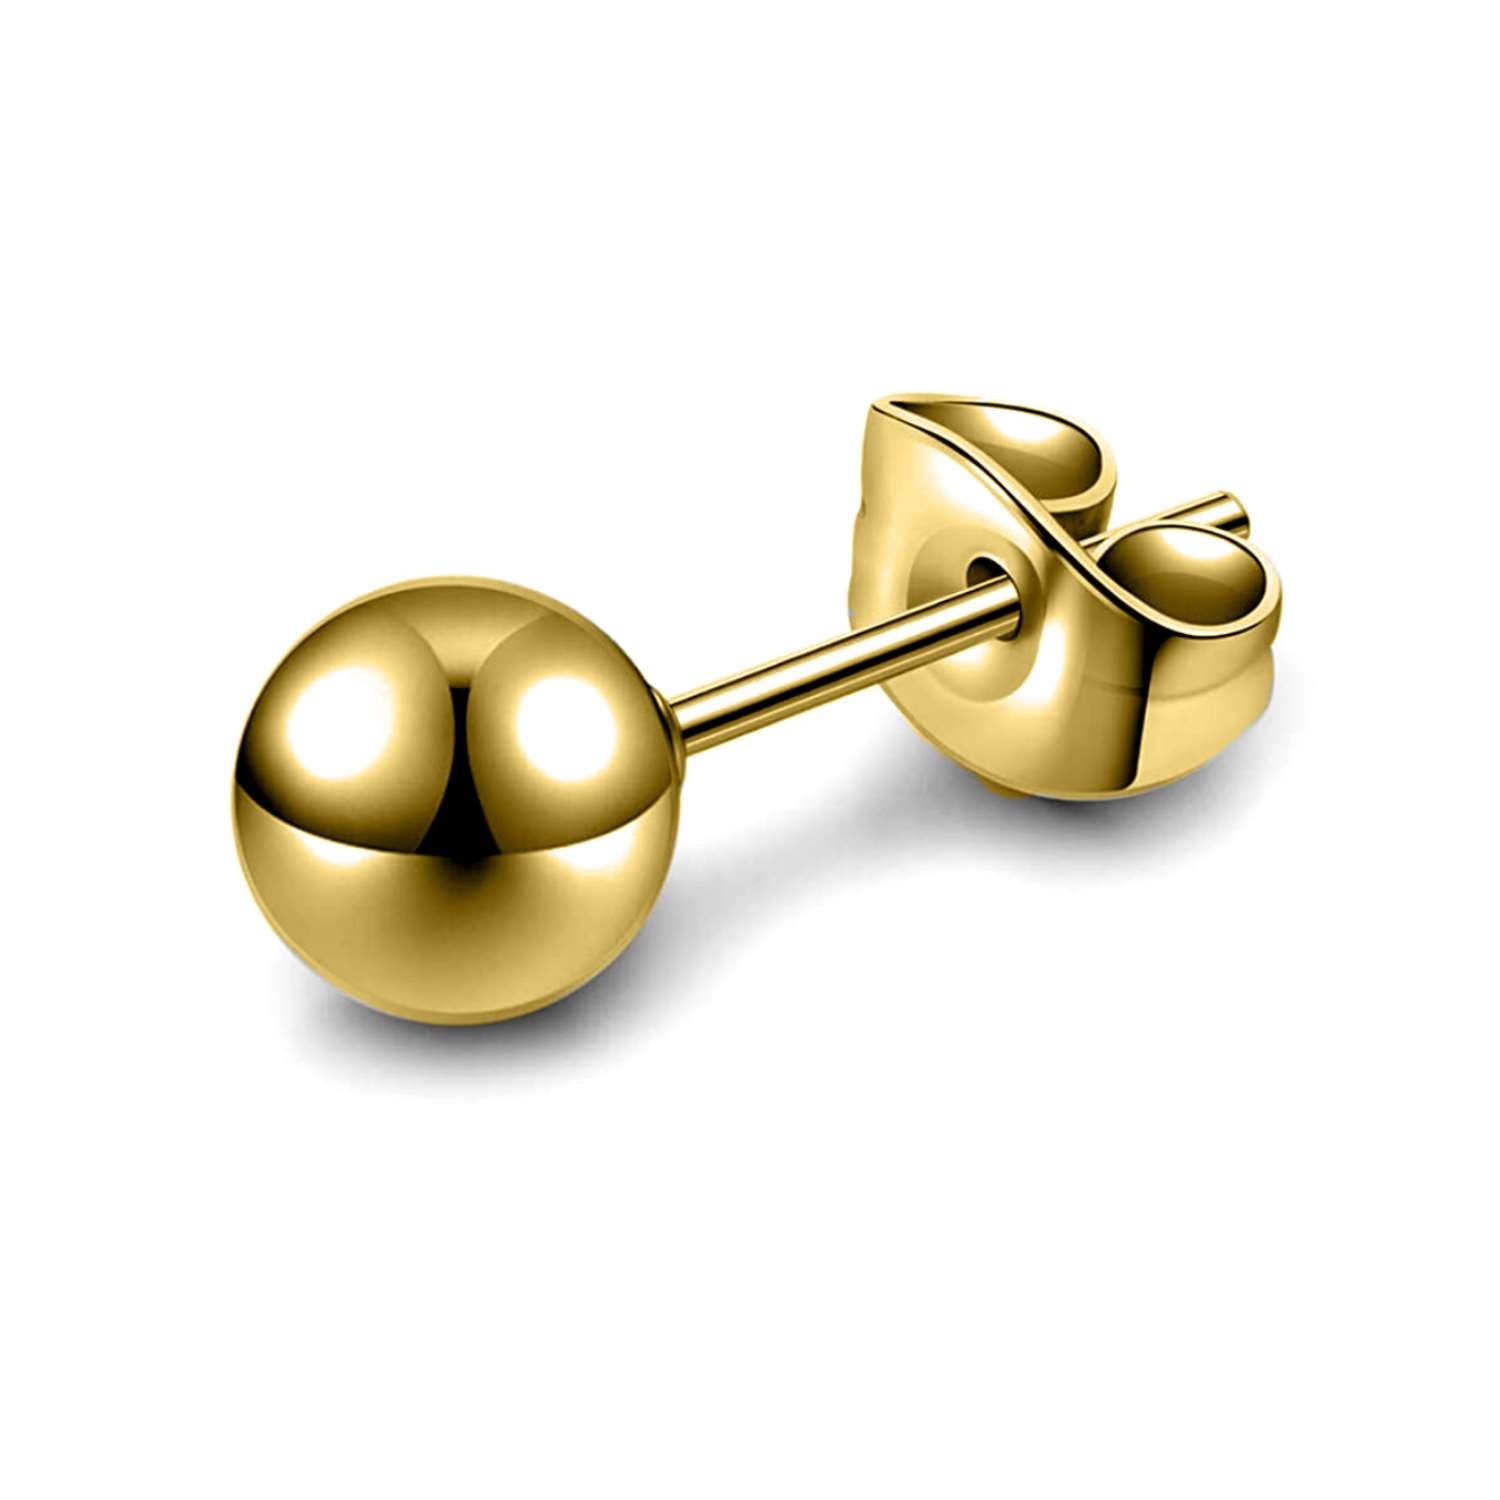 Mens Gold Ball Earring in Pure 92.5 Sterling Silver in 18K Gold Finish. Perfect for all type of piercings.